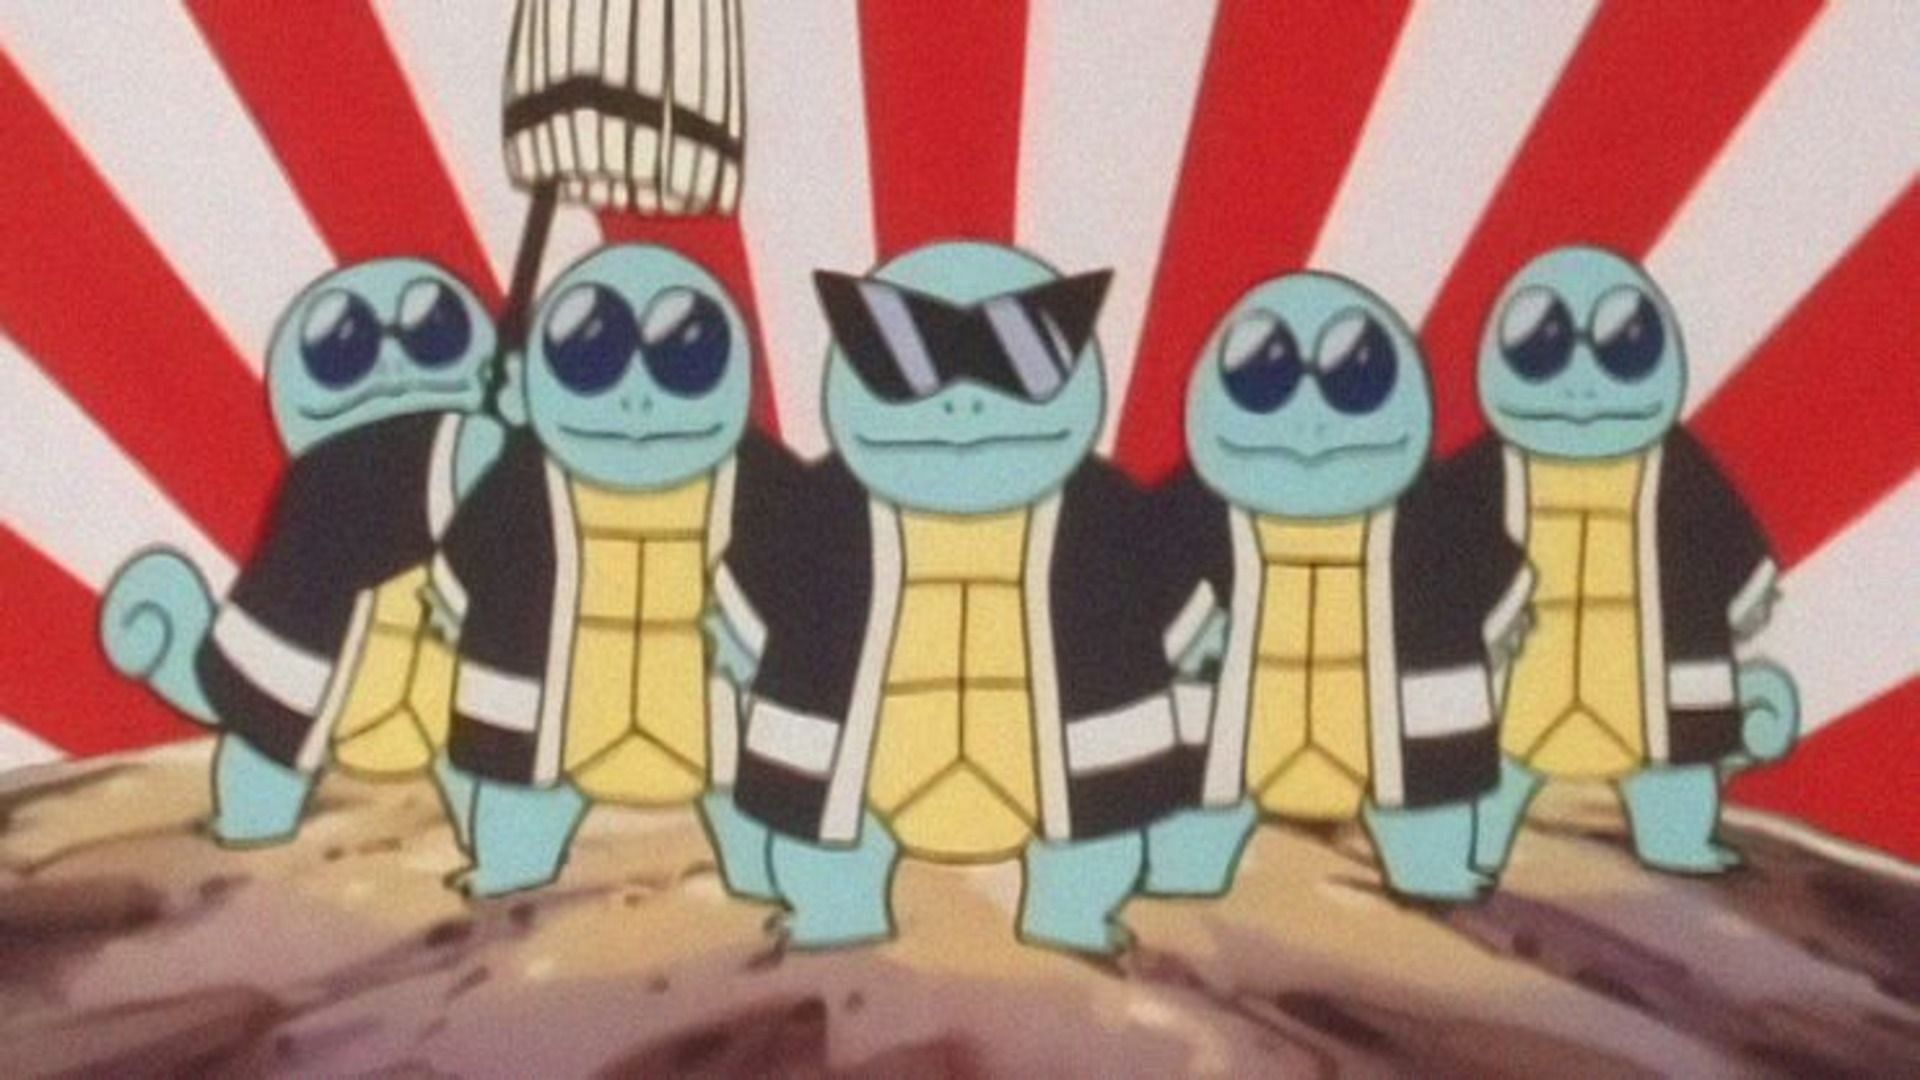 squirtle sunglasses wallpaper